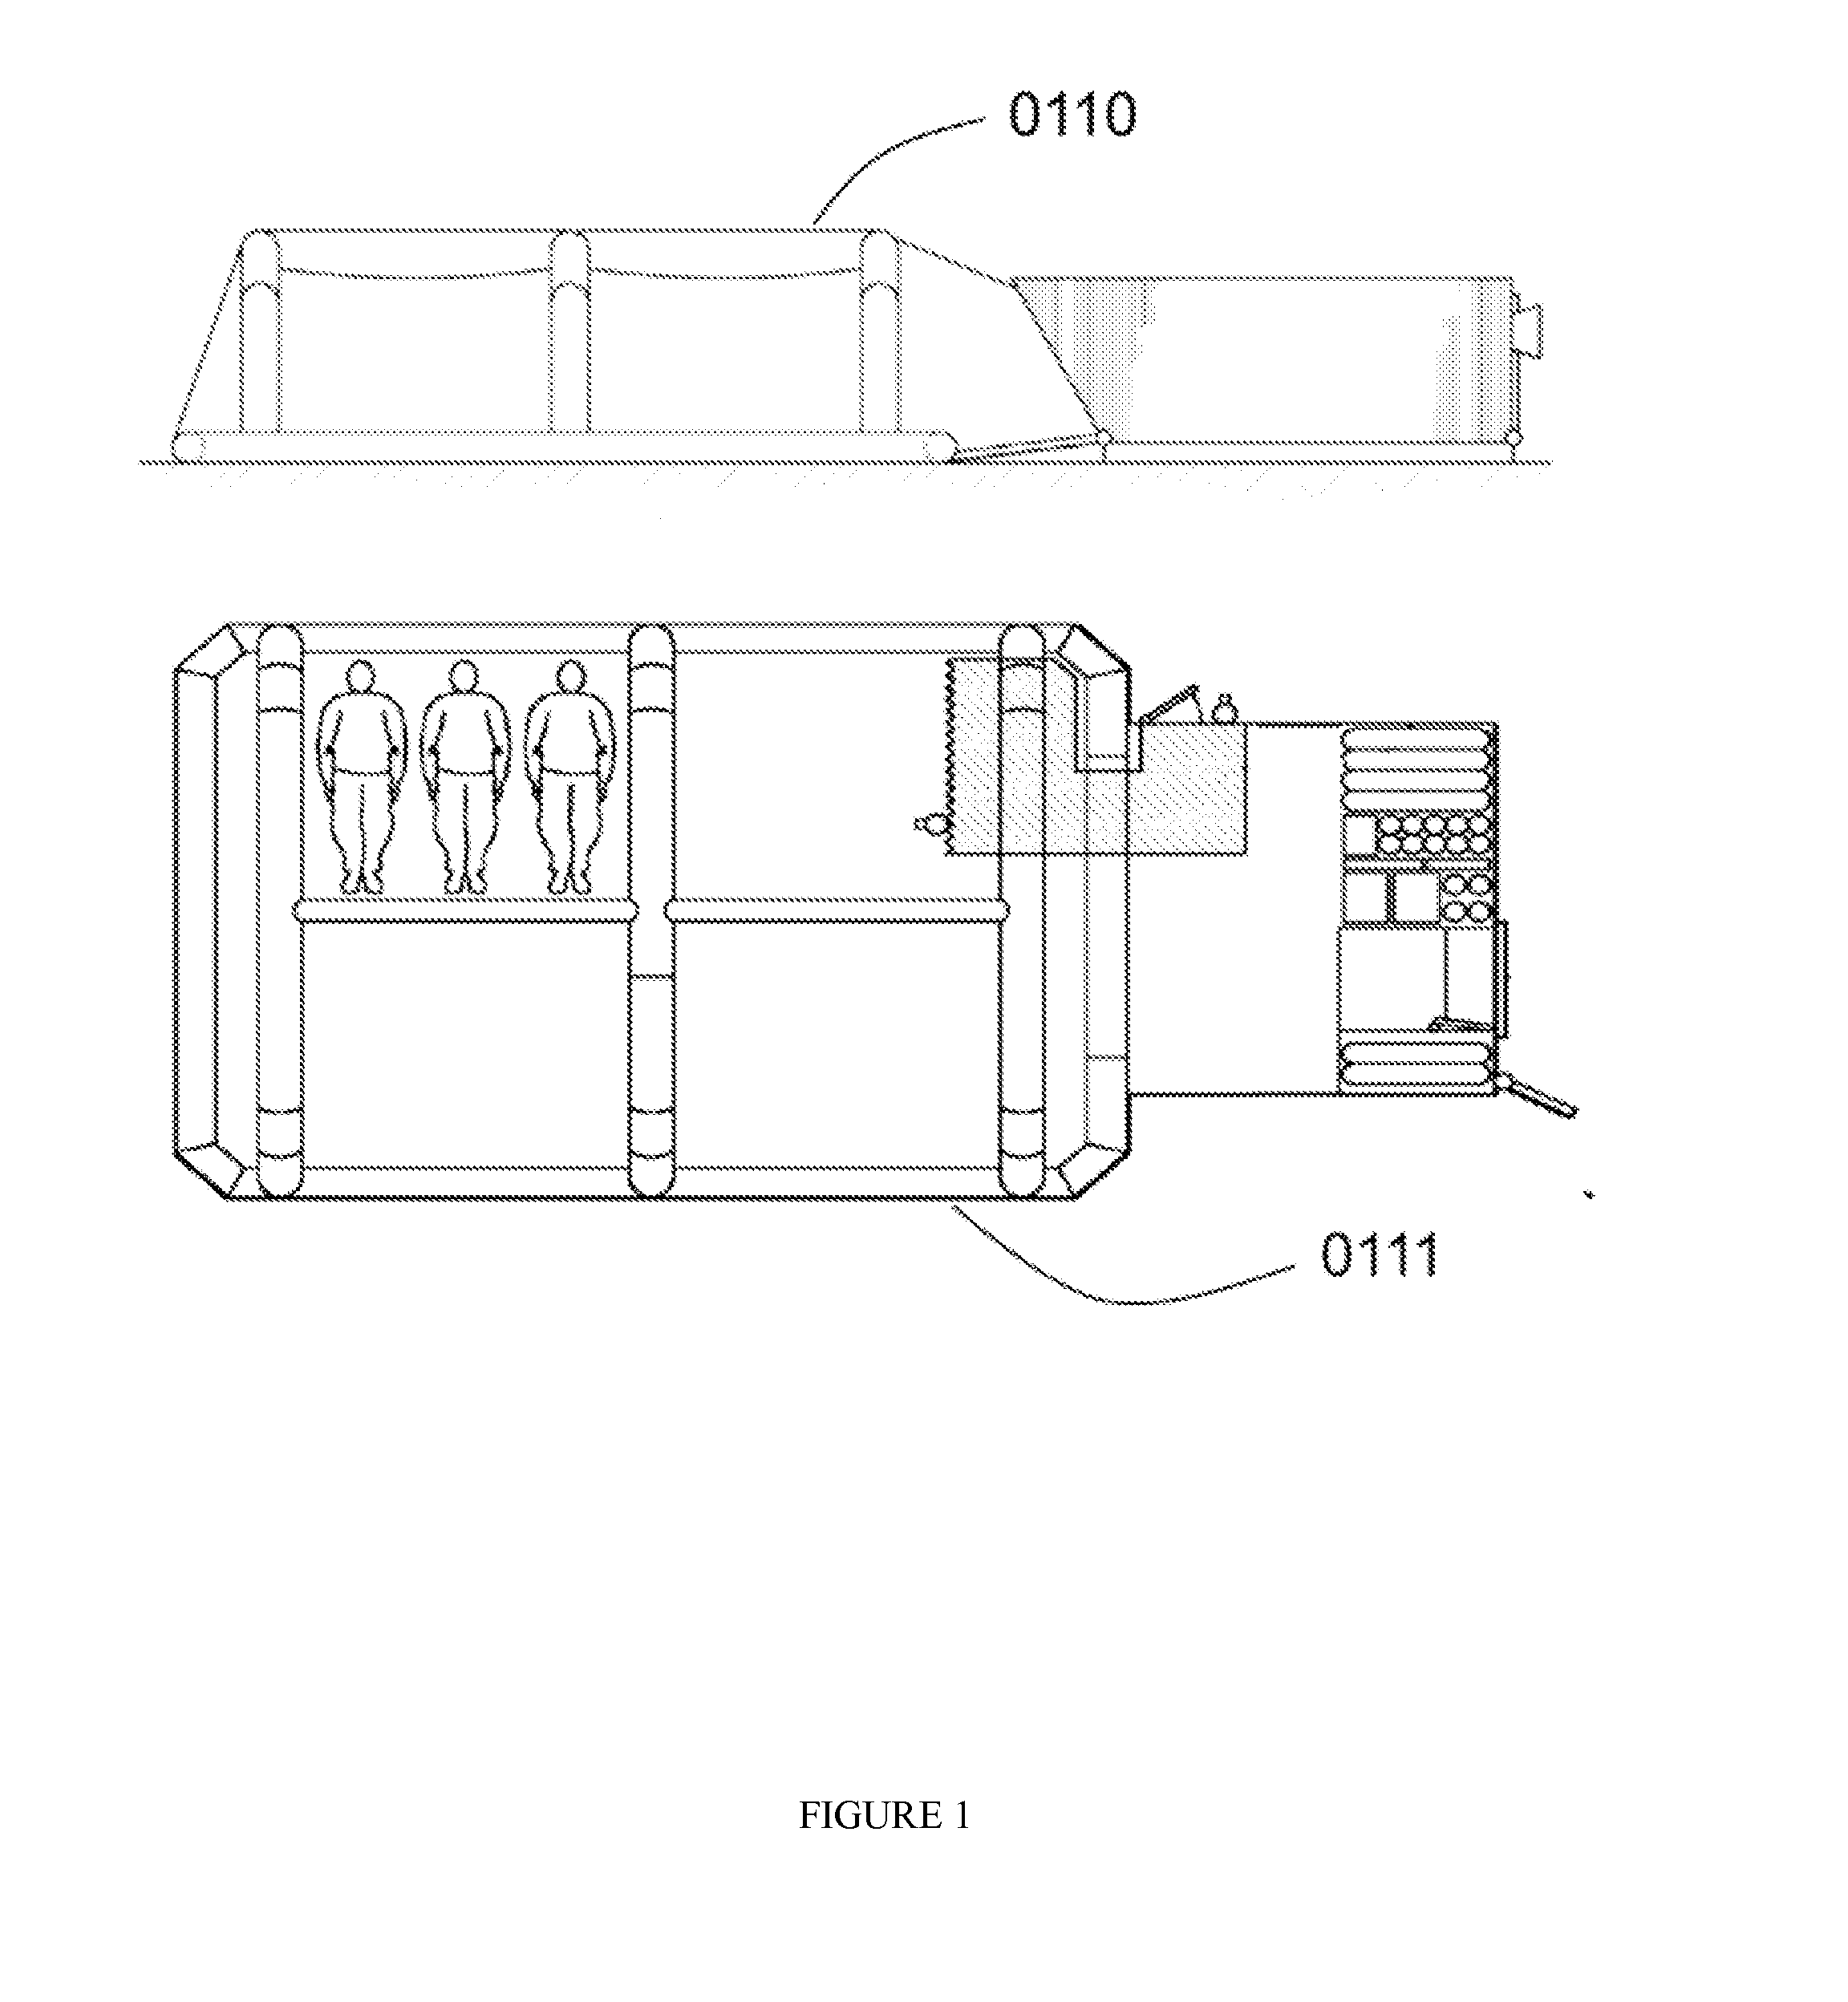 Method and apparatus for providing controlled atmosphere in mobile mine refuges